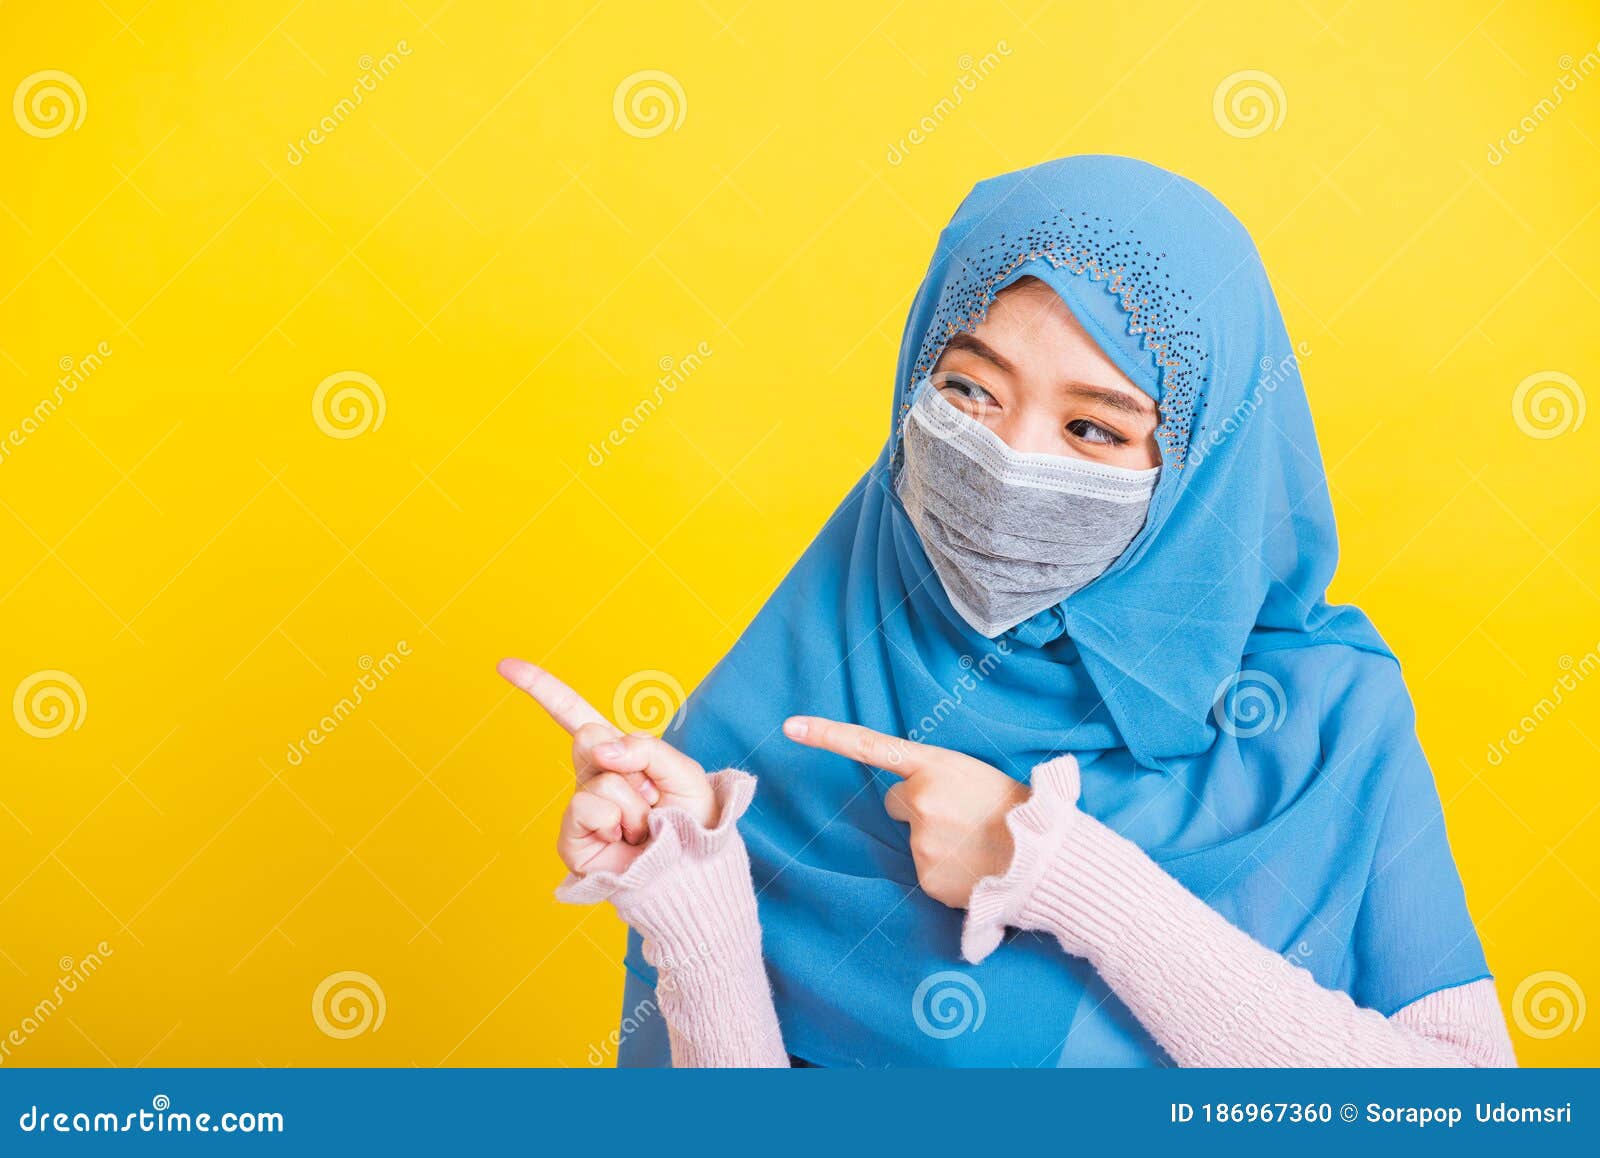 Woman Wear  Hijab  And Face  Mask  Protective To Prevent 